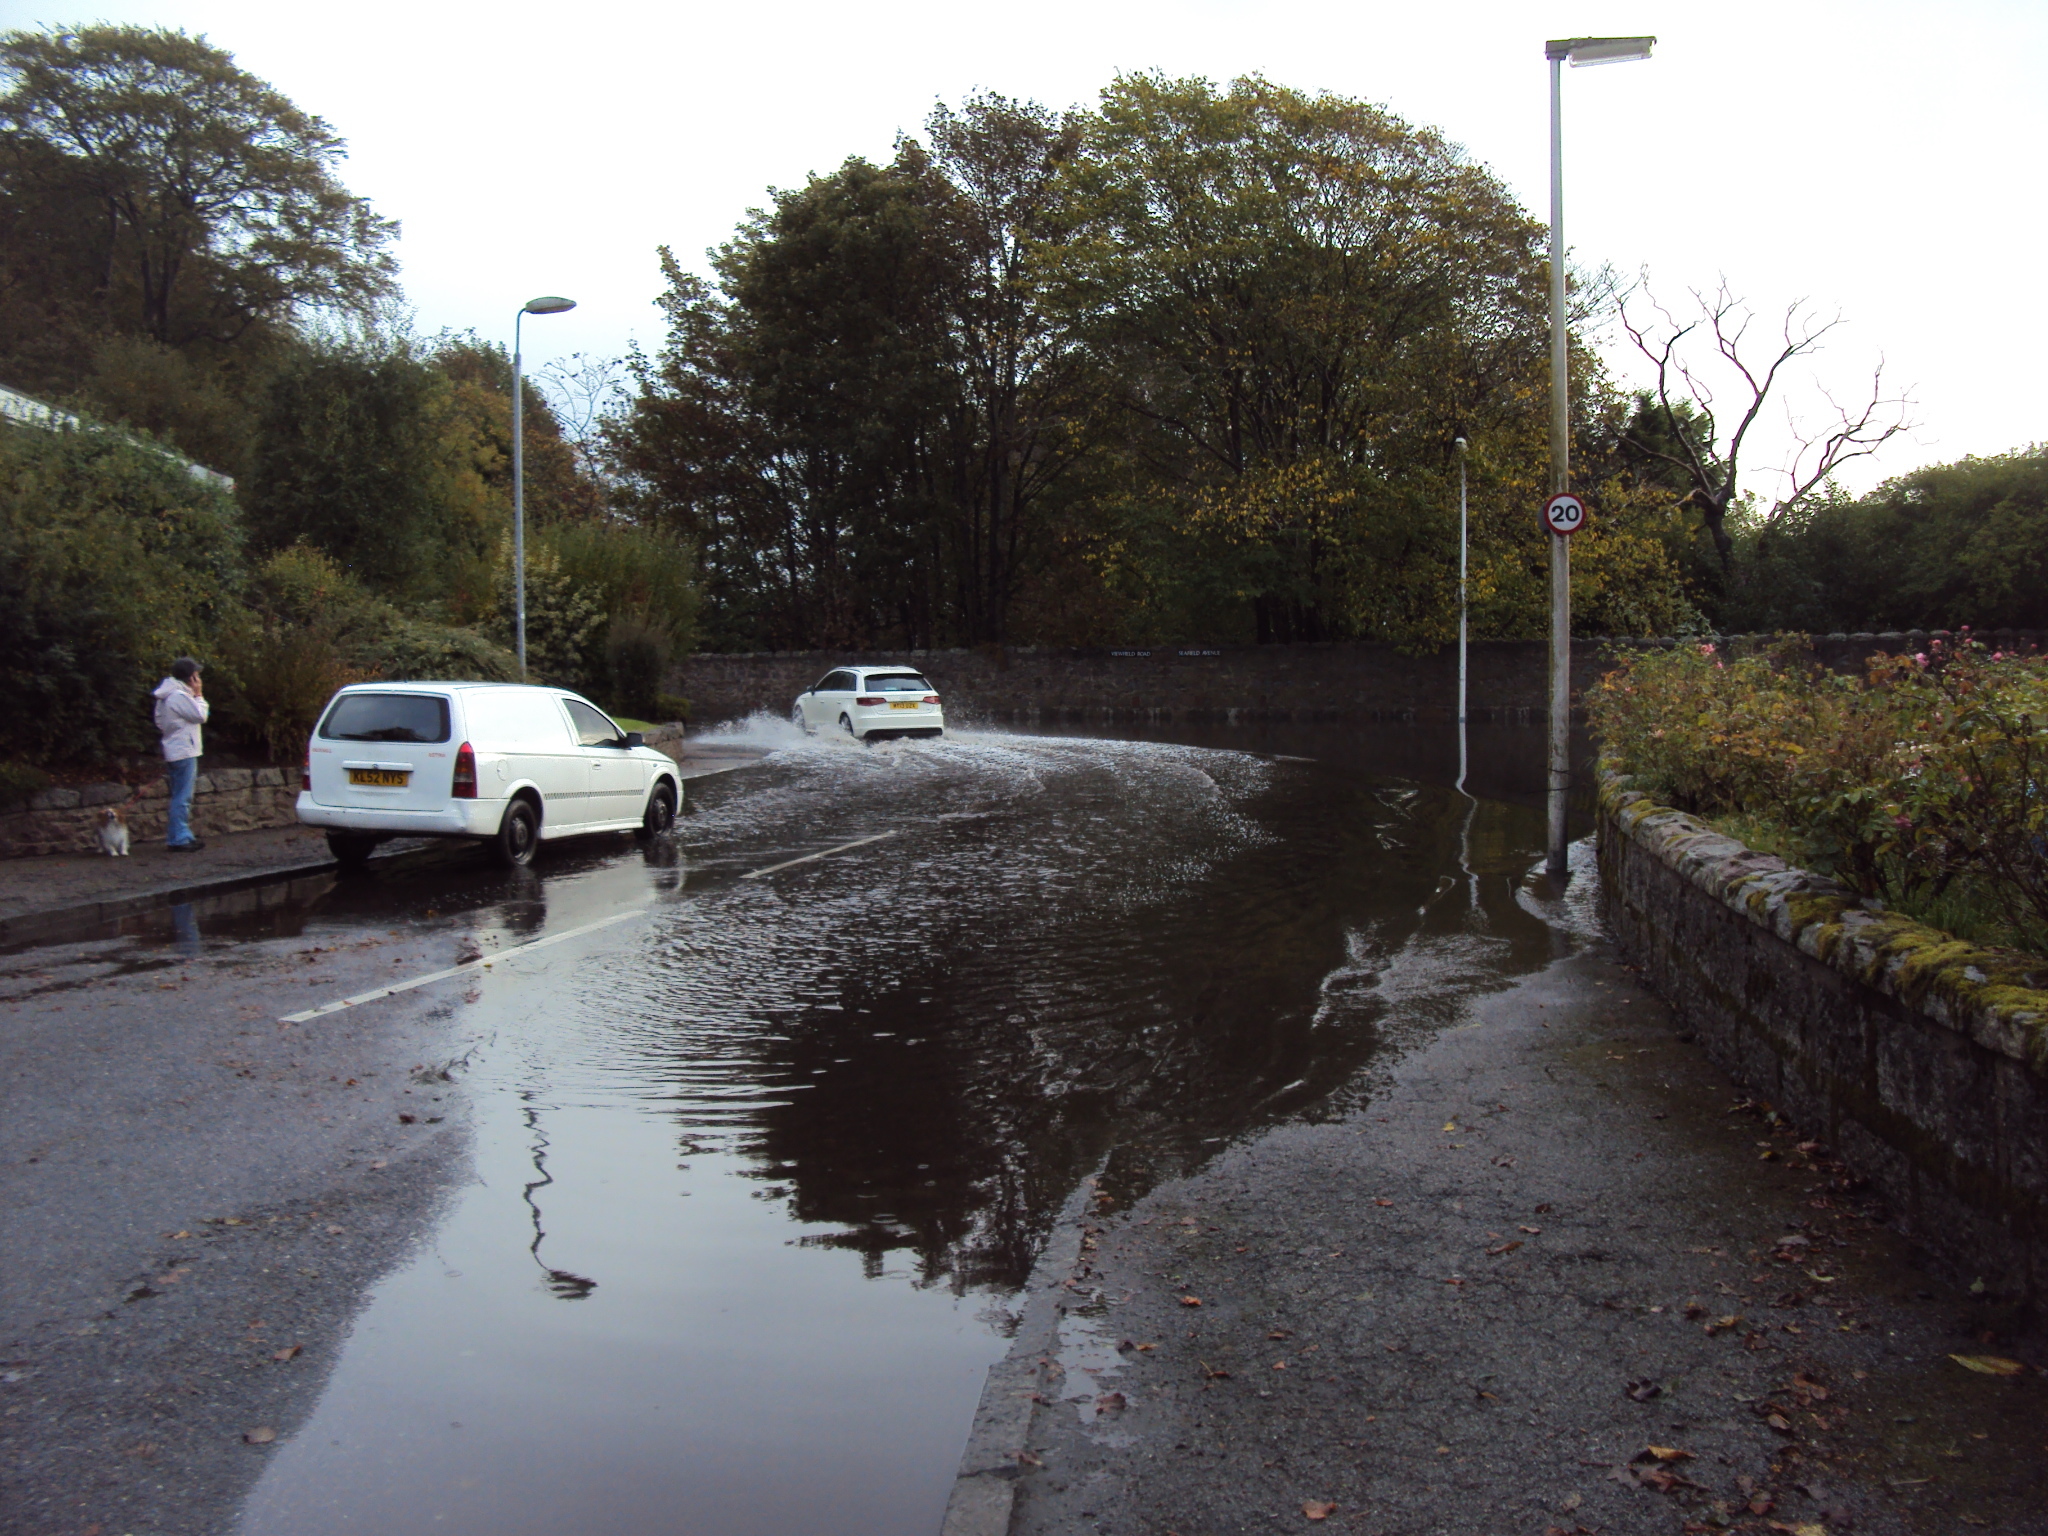 Residents claimed drainage problems made the flooding worse